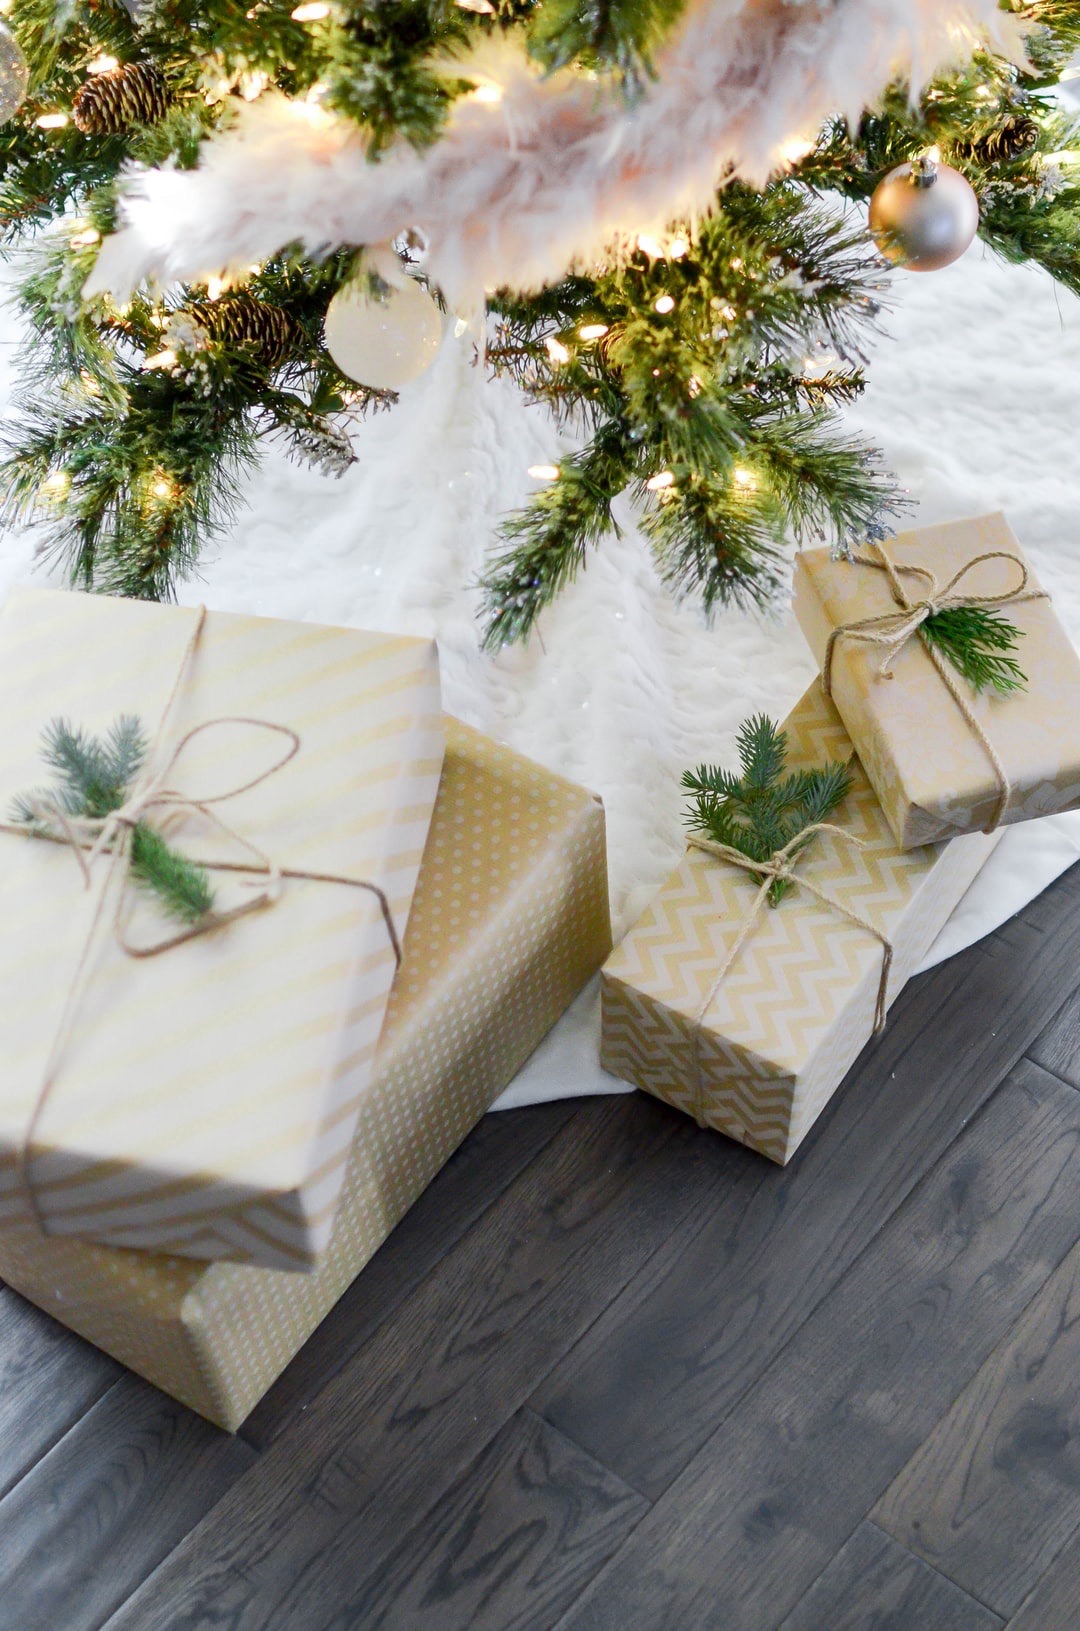 5 Tips for Gift Giving